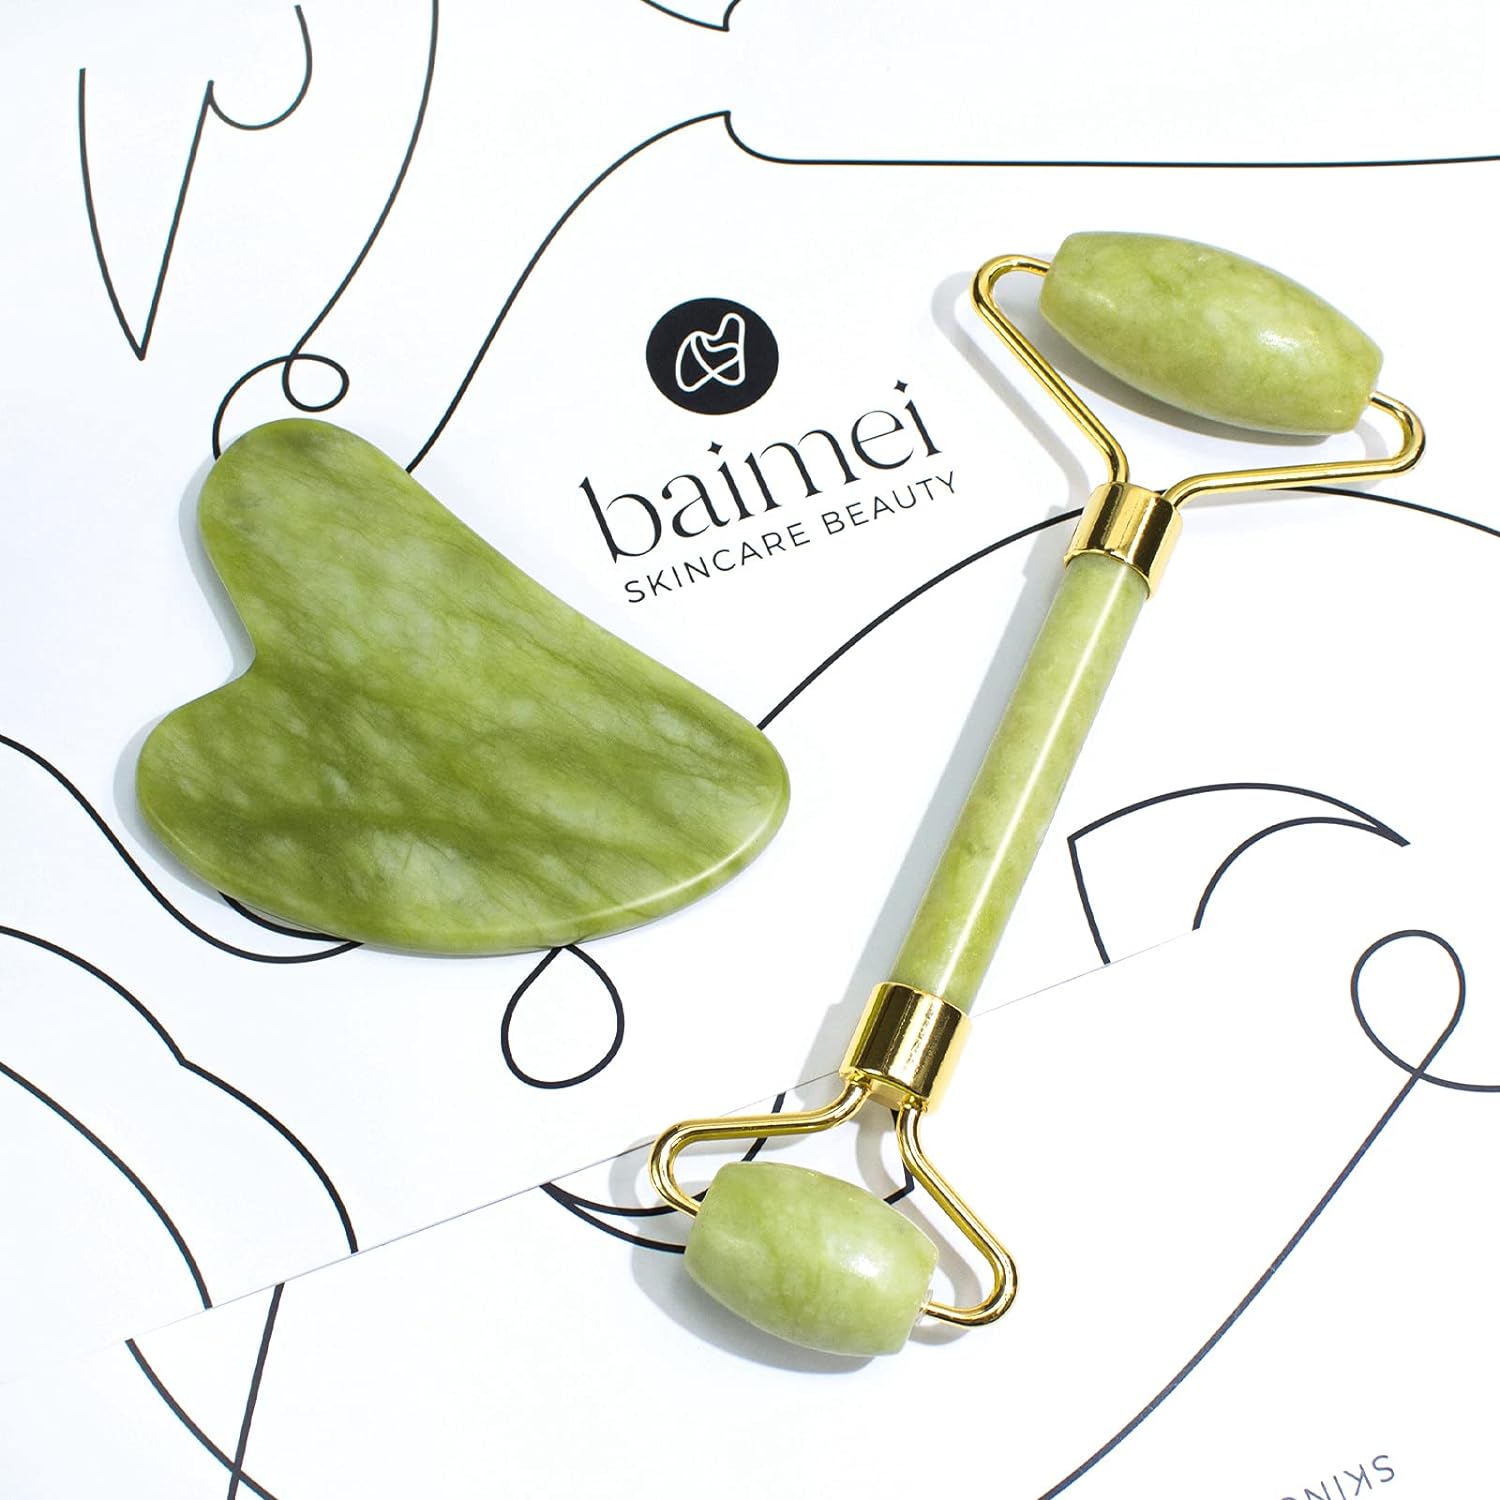 BAIMEI Gua Sha & Jade Roller Facial Tools Face Roller and Gua Sha Set for Skin Care Routine and Puffiness, Self Care Gift for Men Women - Green